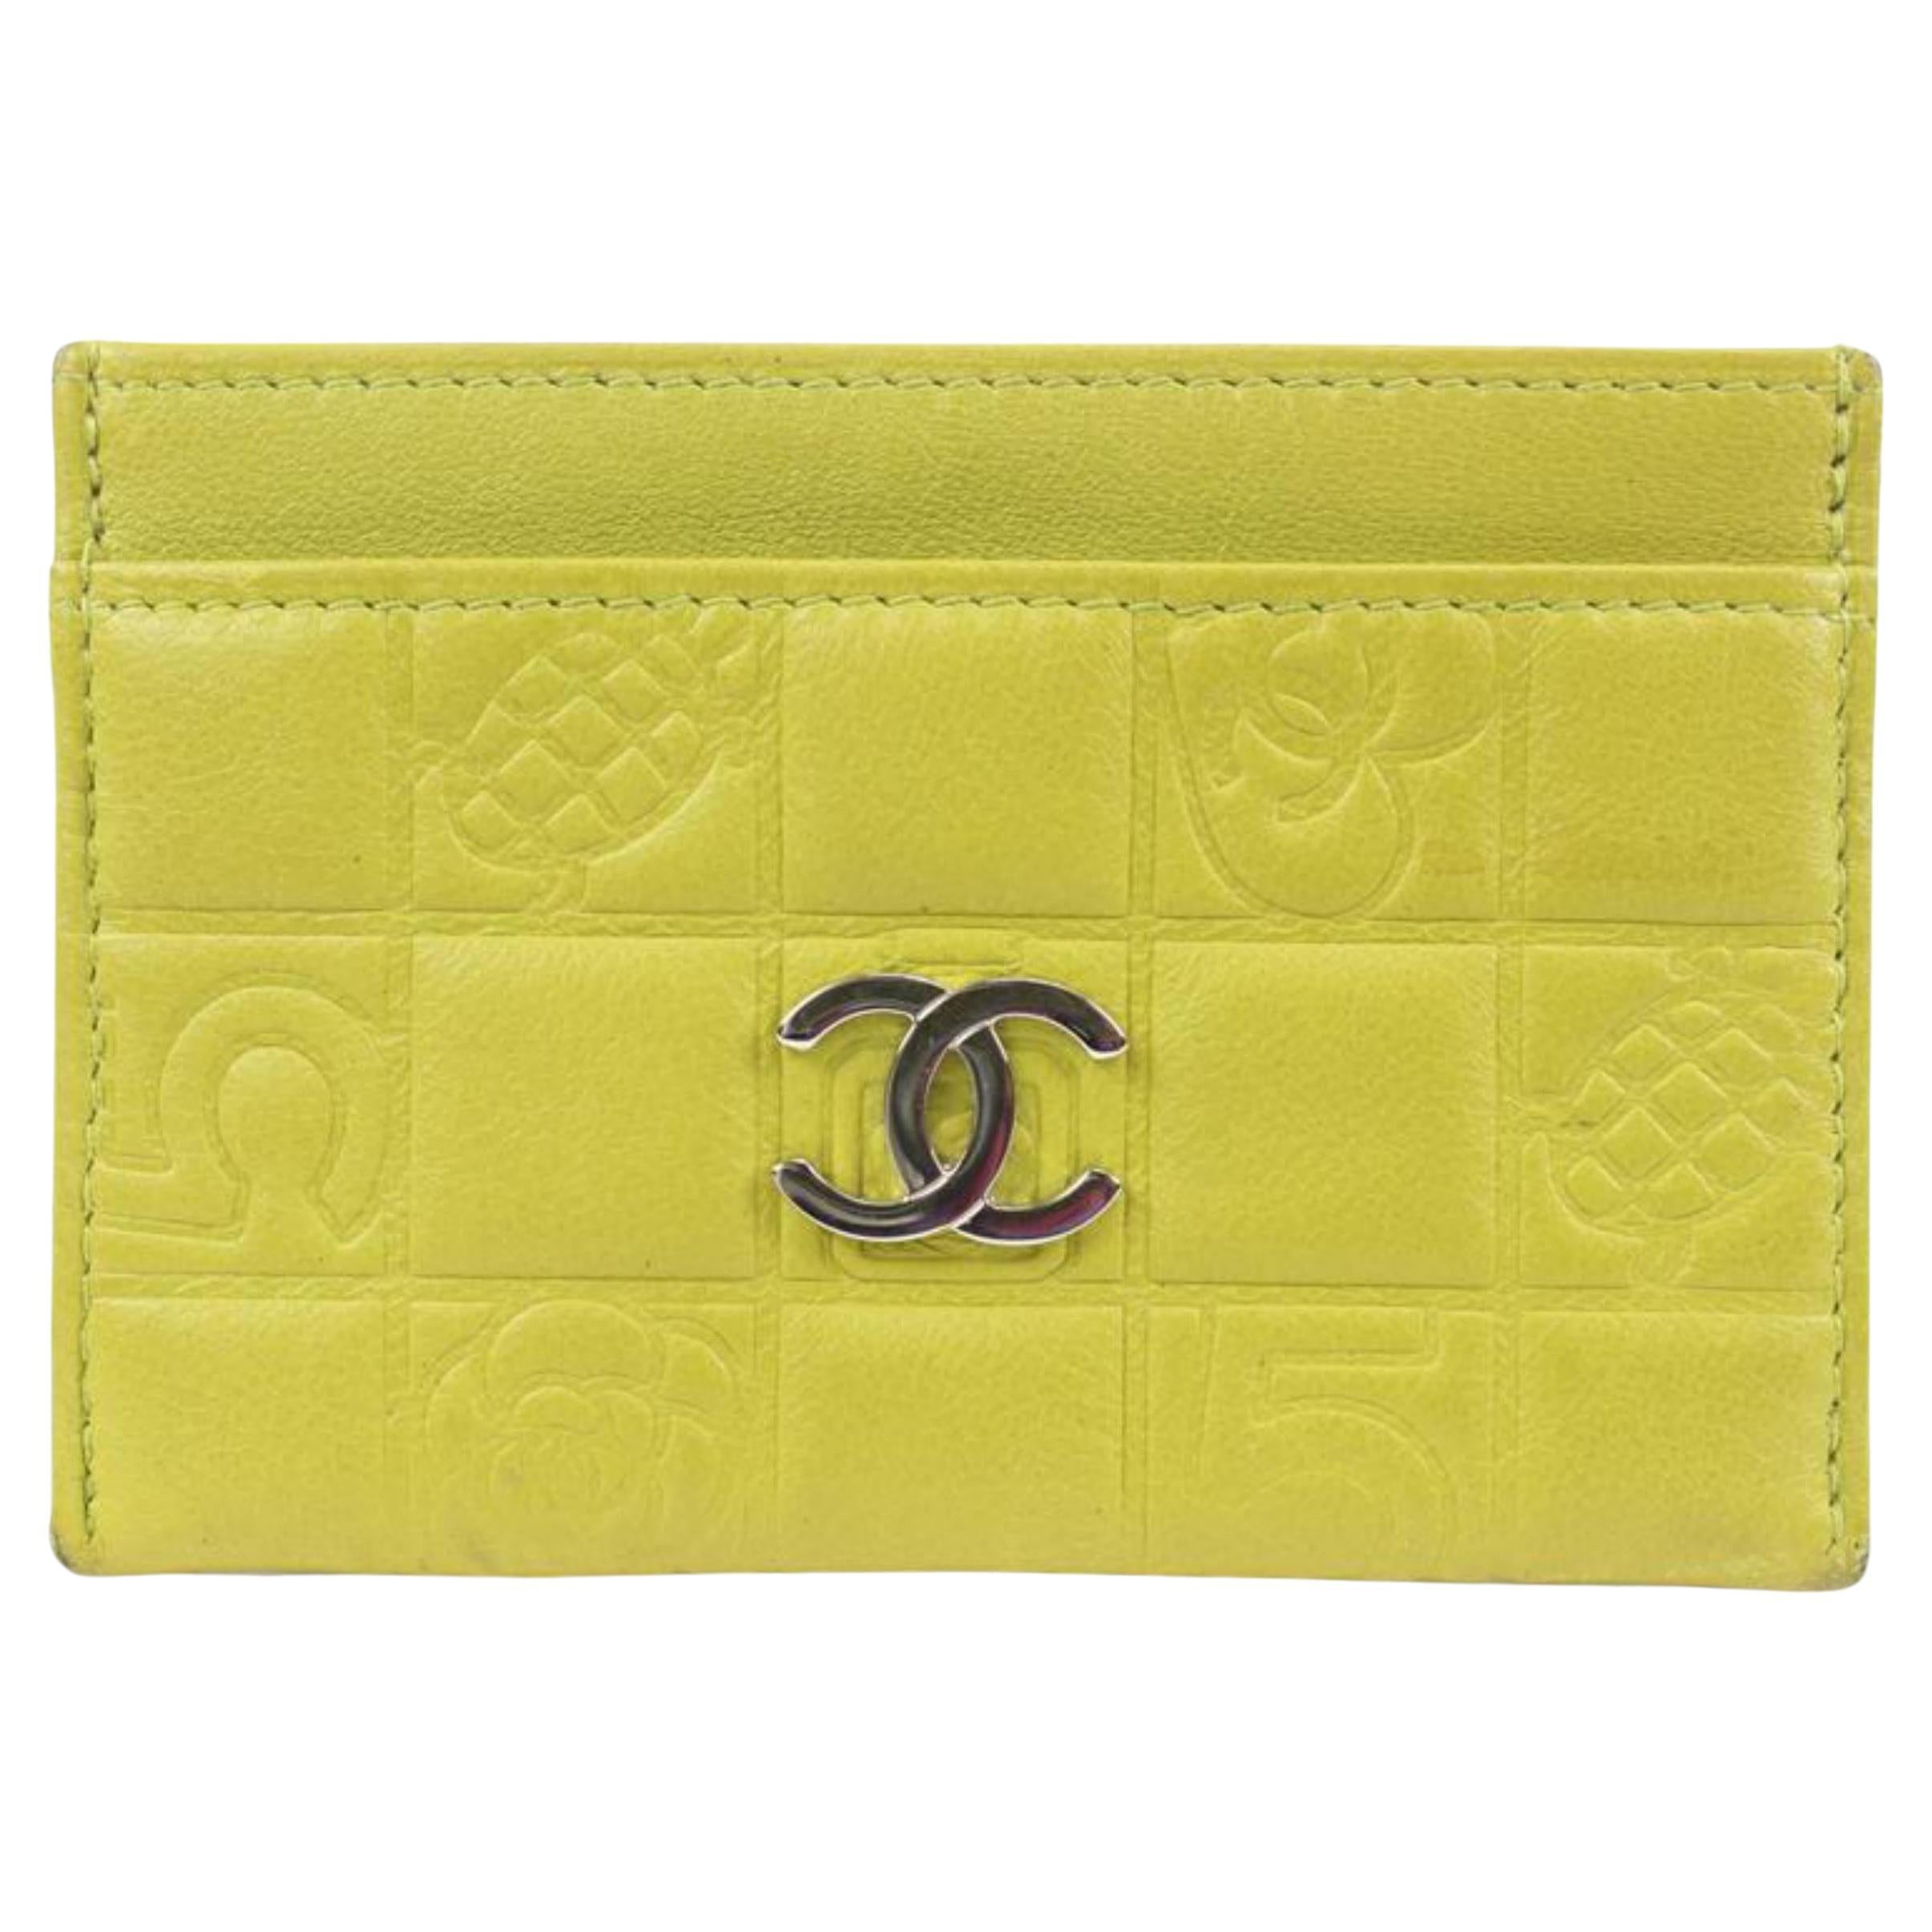 Chanel Lime Green Quilted Chocolate Bar Card Holder Wallet Case 52ck322s